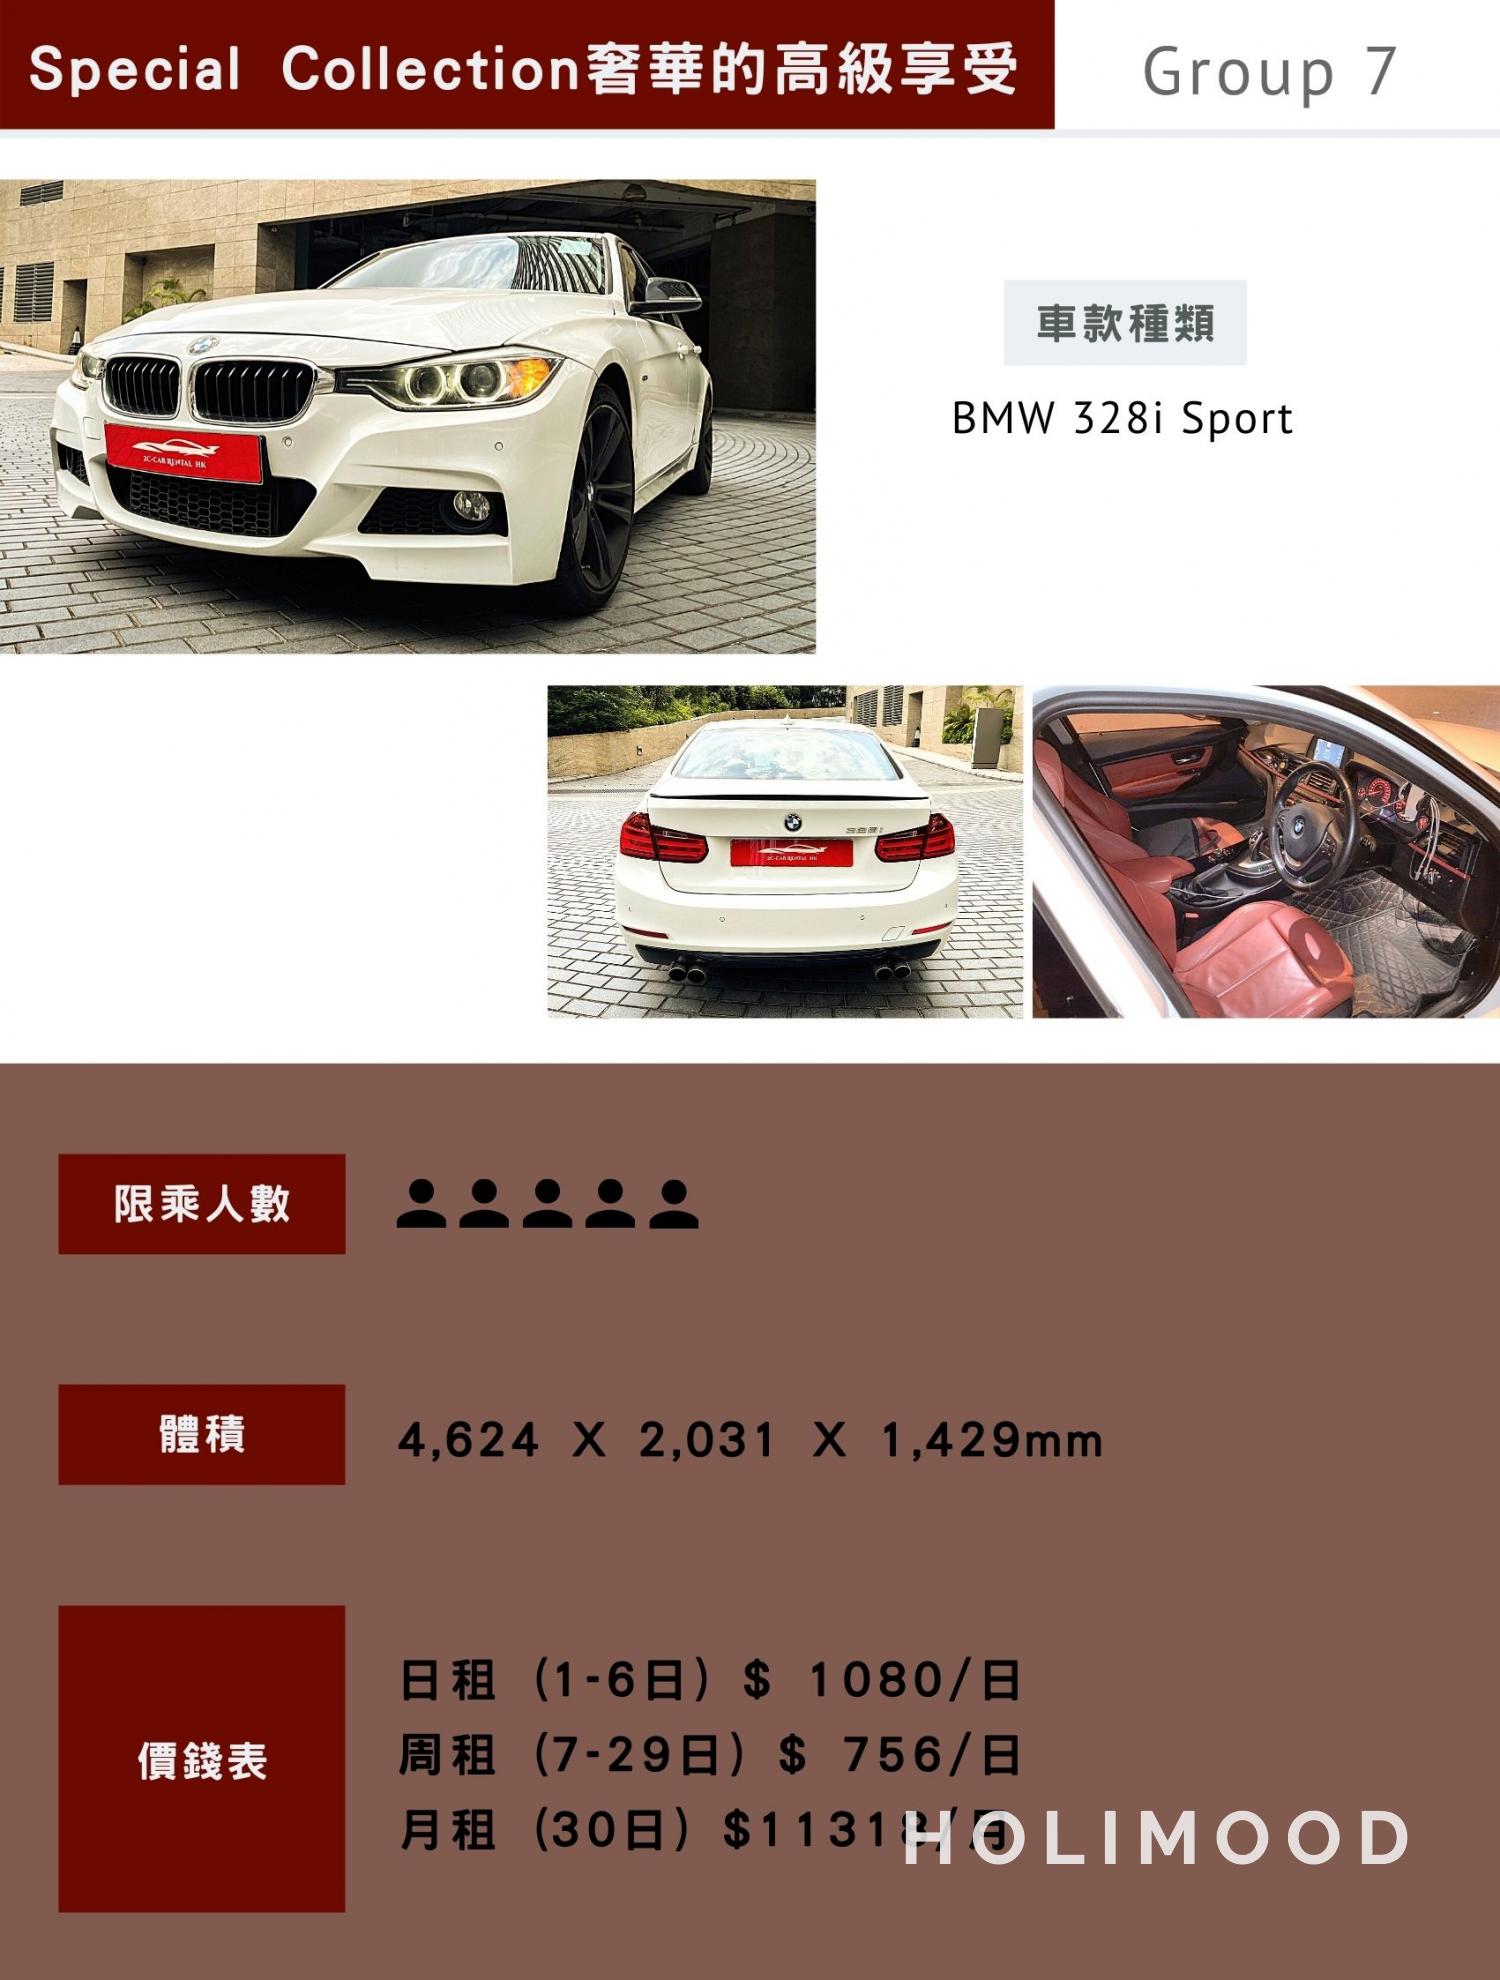 BMW 328i Sport - Special Collection  假日度假之選 （日租）